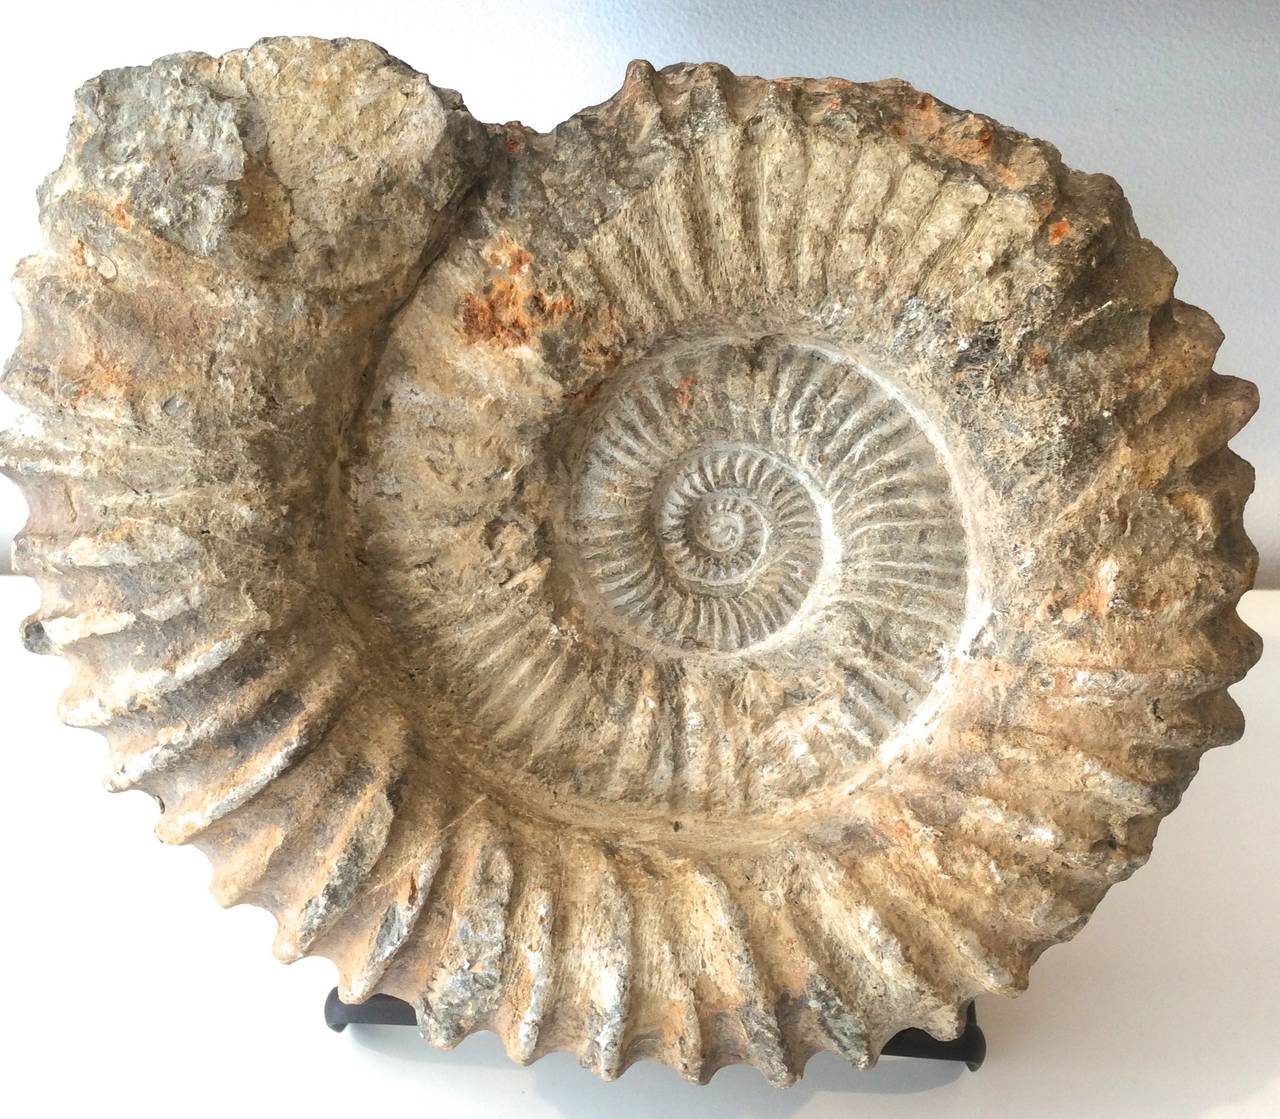 Large Ammonite Fossil - Sculpture by Unknown